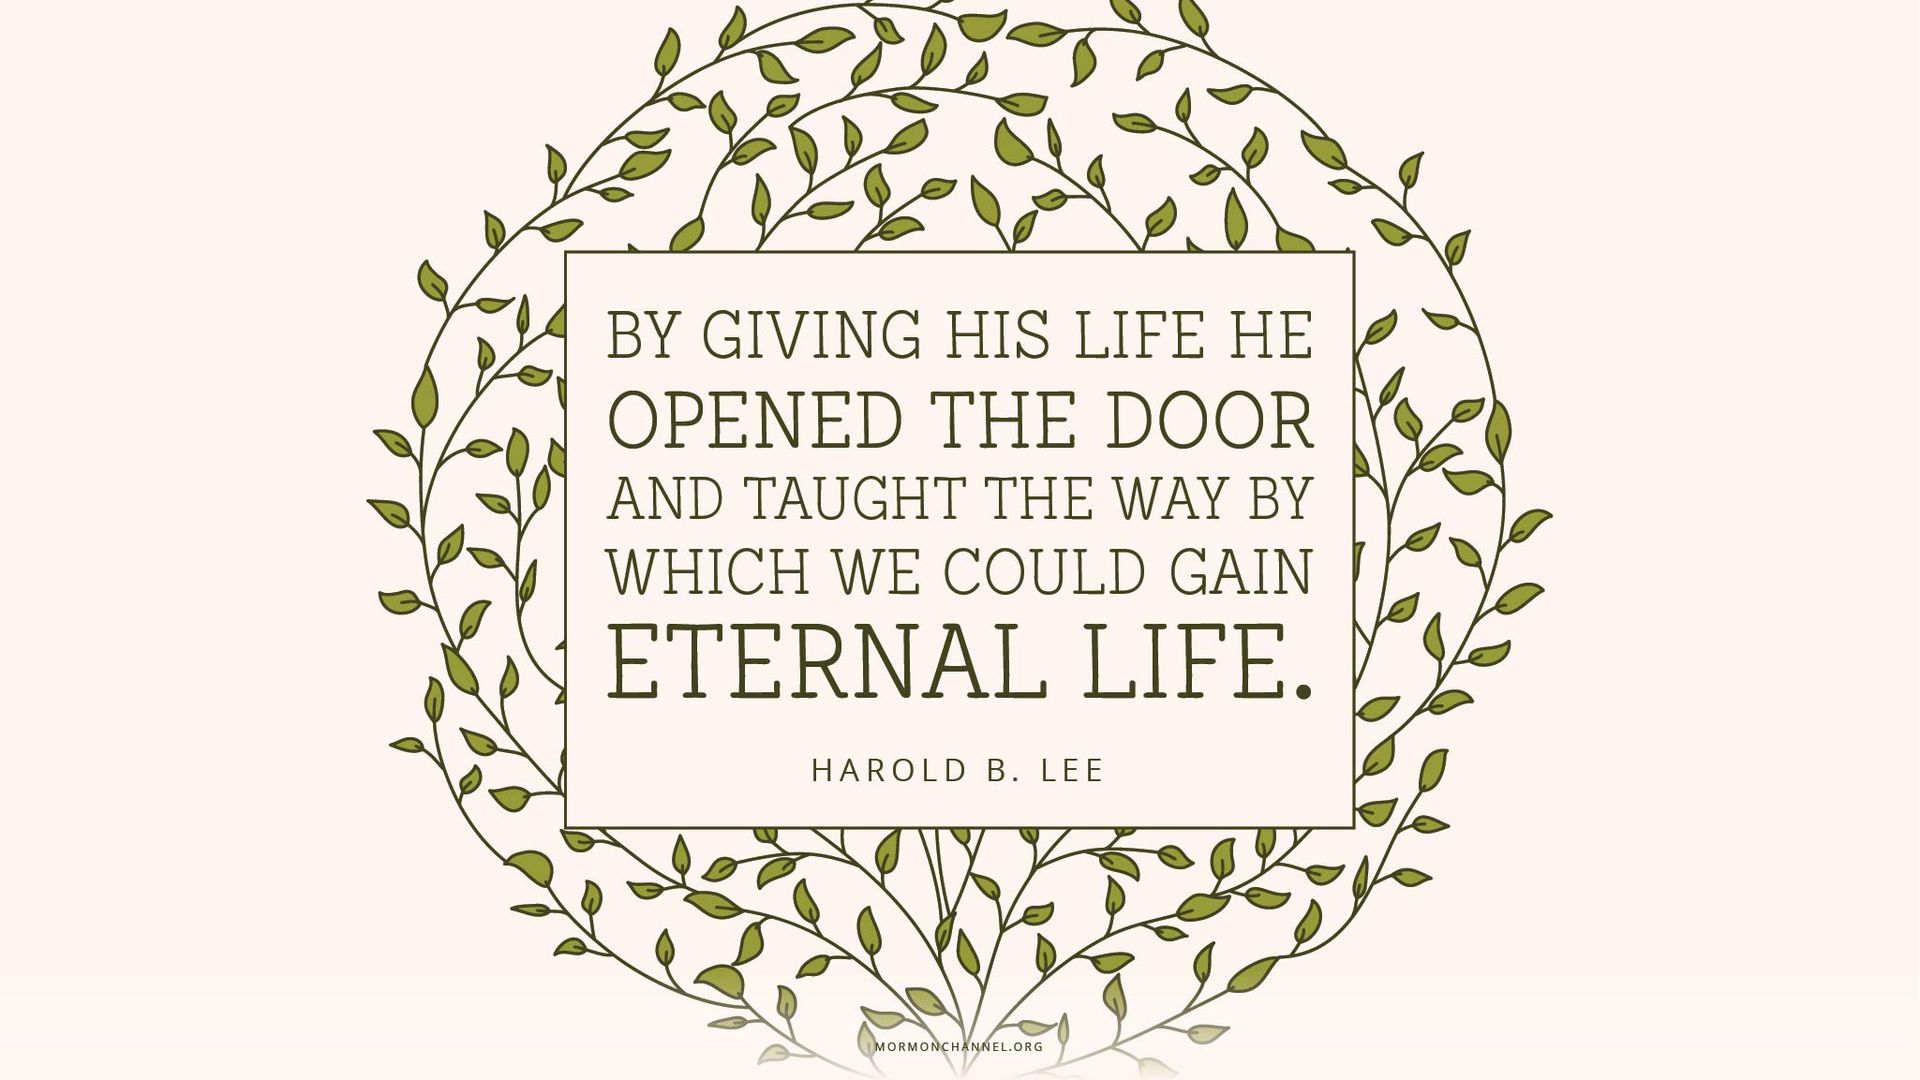 “By giving His life He opened the door … and taught the way by which we could gain eternal life.”—President Harold B. Lee, Teachings of Presidents of the Church: Harold B. Lee